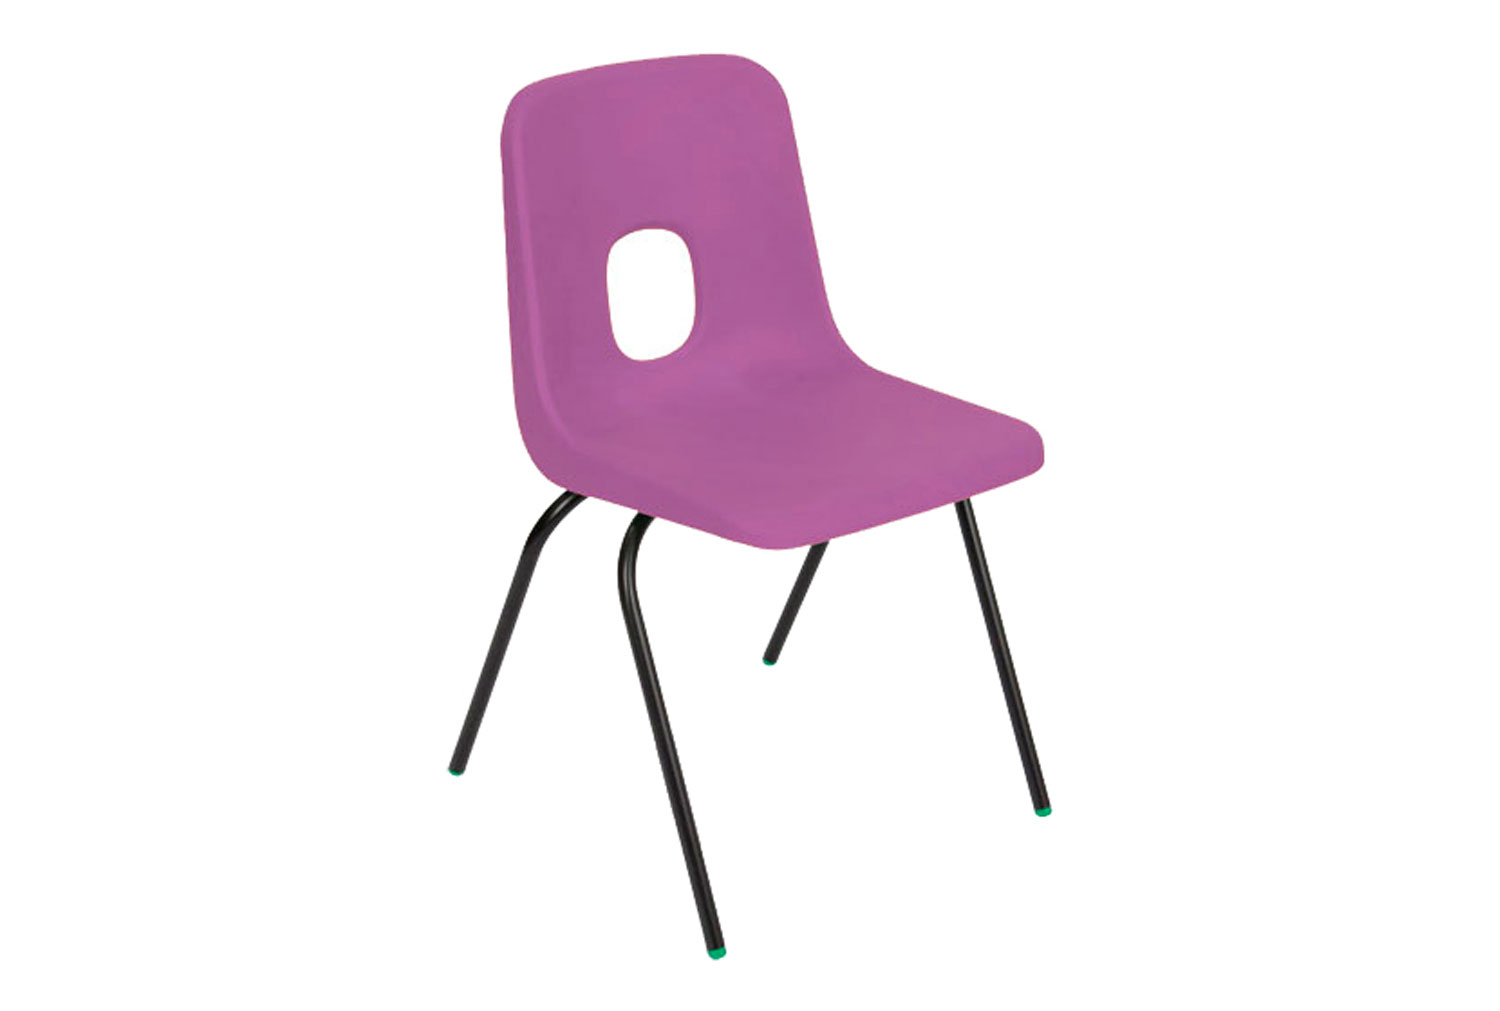 Qty 8 - Hille E Series Classroom Chair, 14+ Years - 41wx37dx46h (cm), Grey Frame, Purple